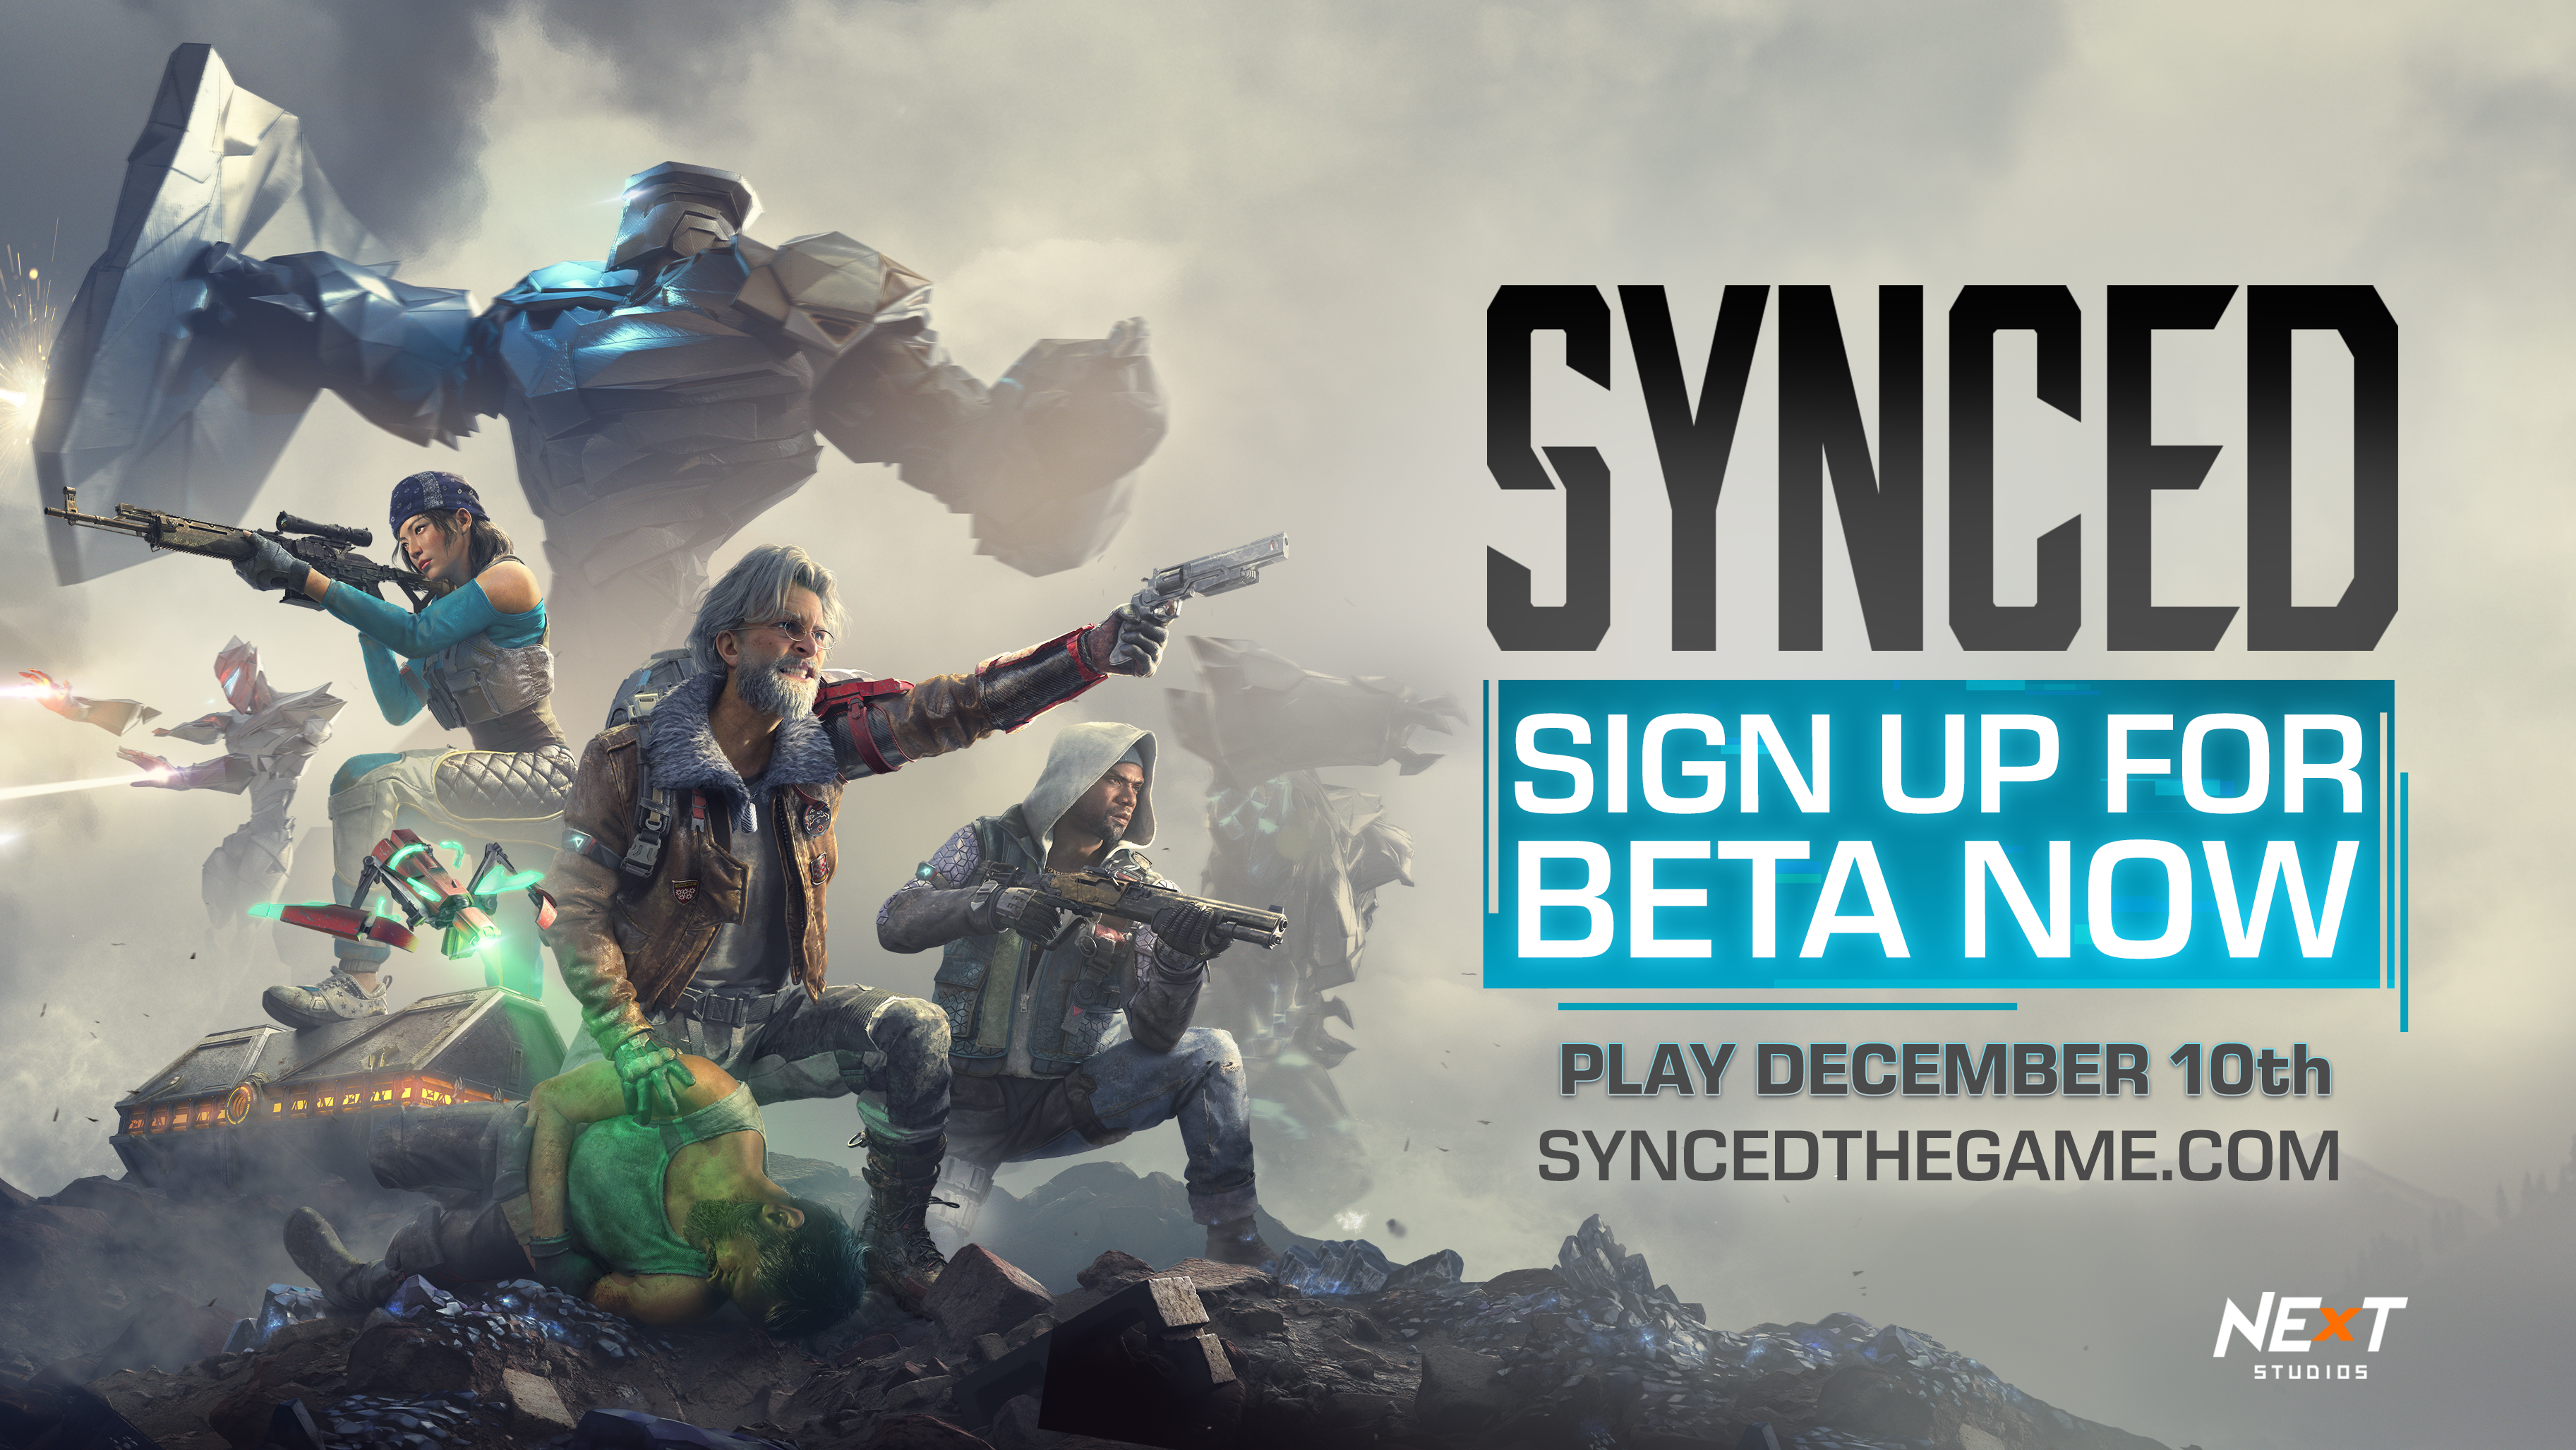 Upcoming Rogue-Looter-Shooter SYNCED Starts Open Beta December 10